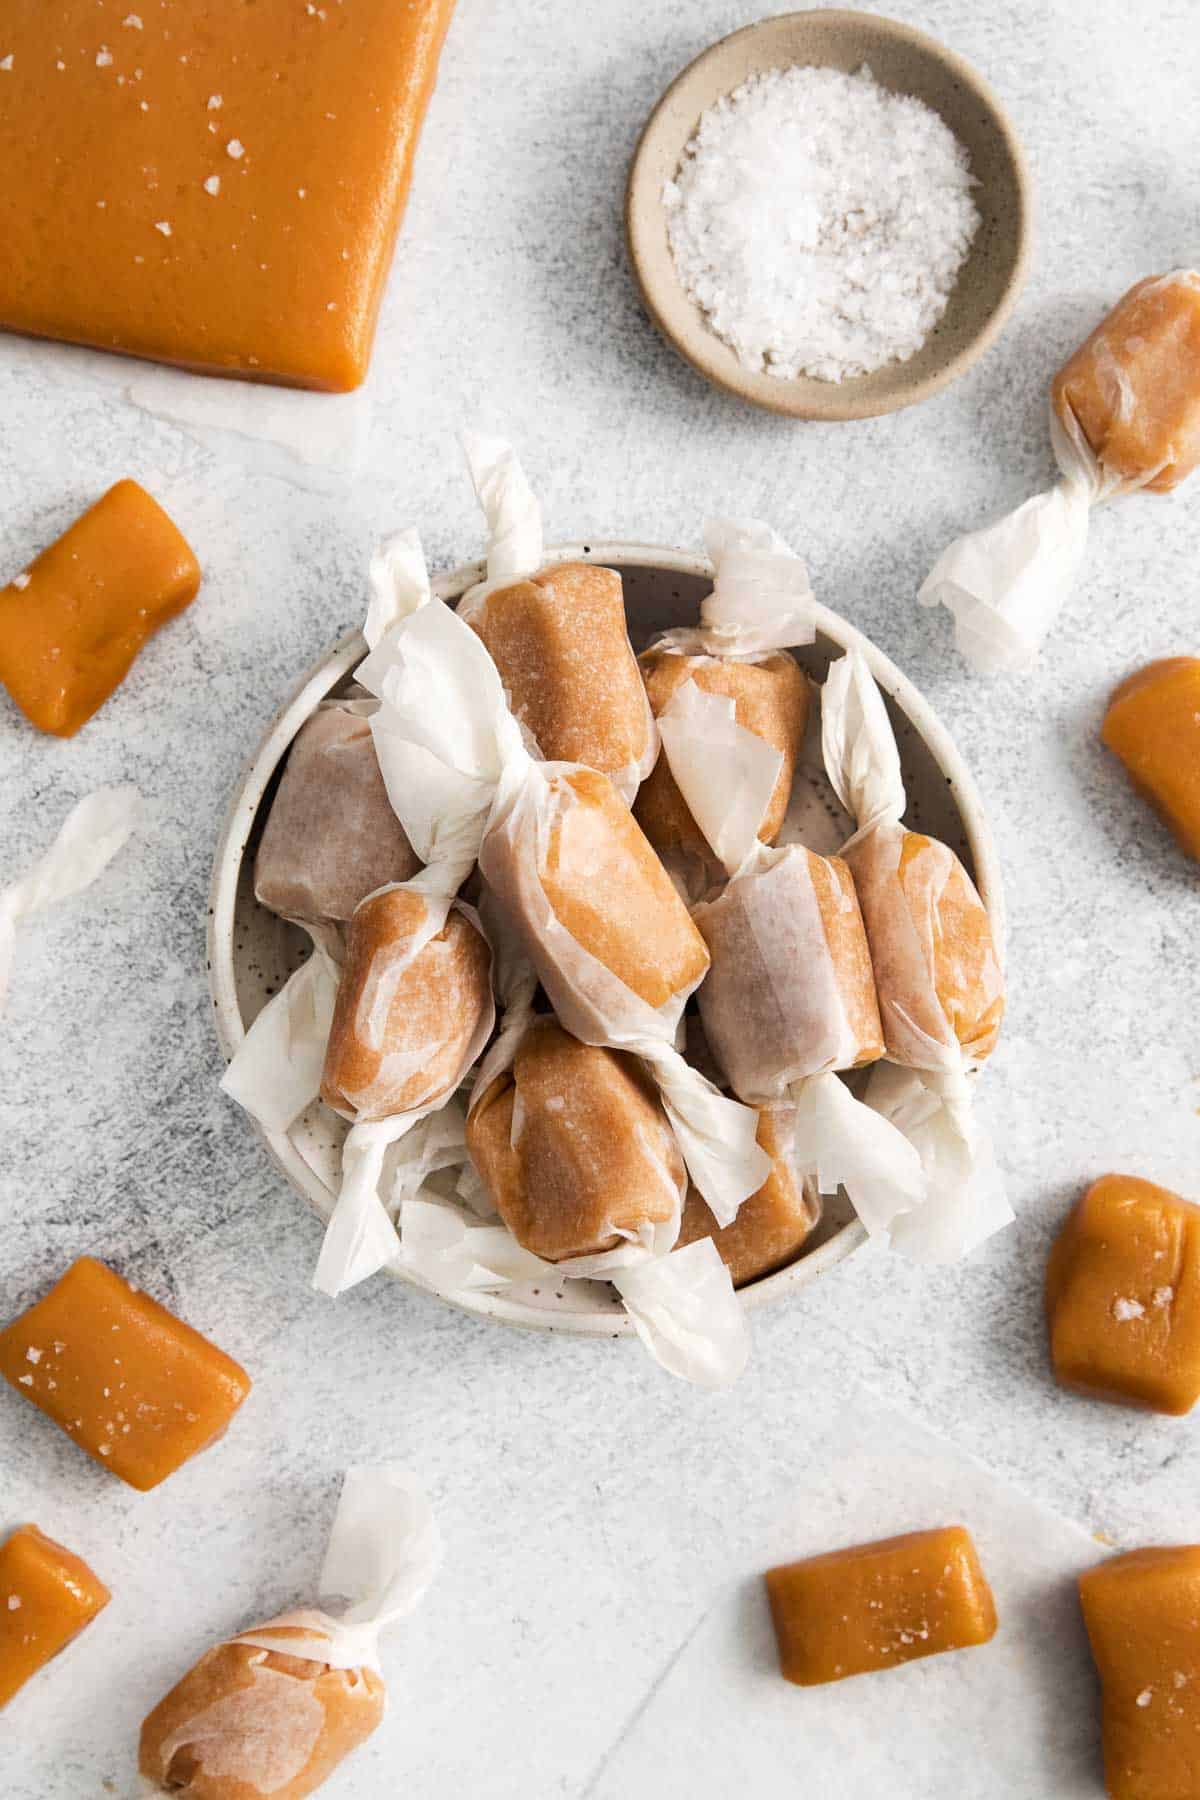 Caramels wrapped in wax paper and placed in a bowl